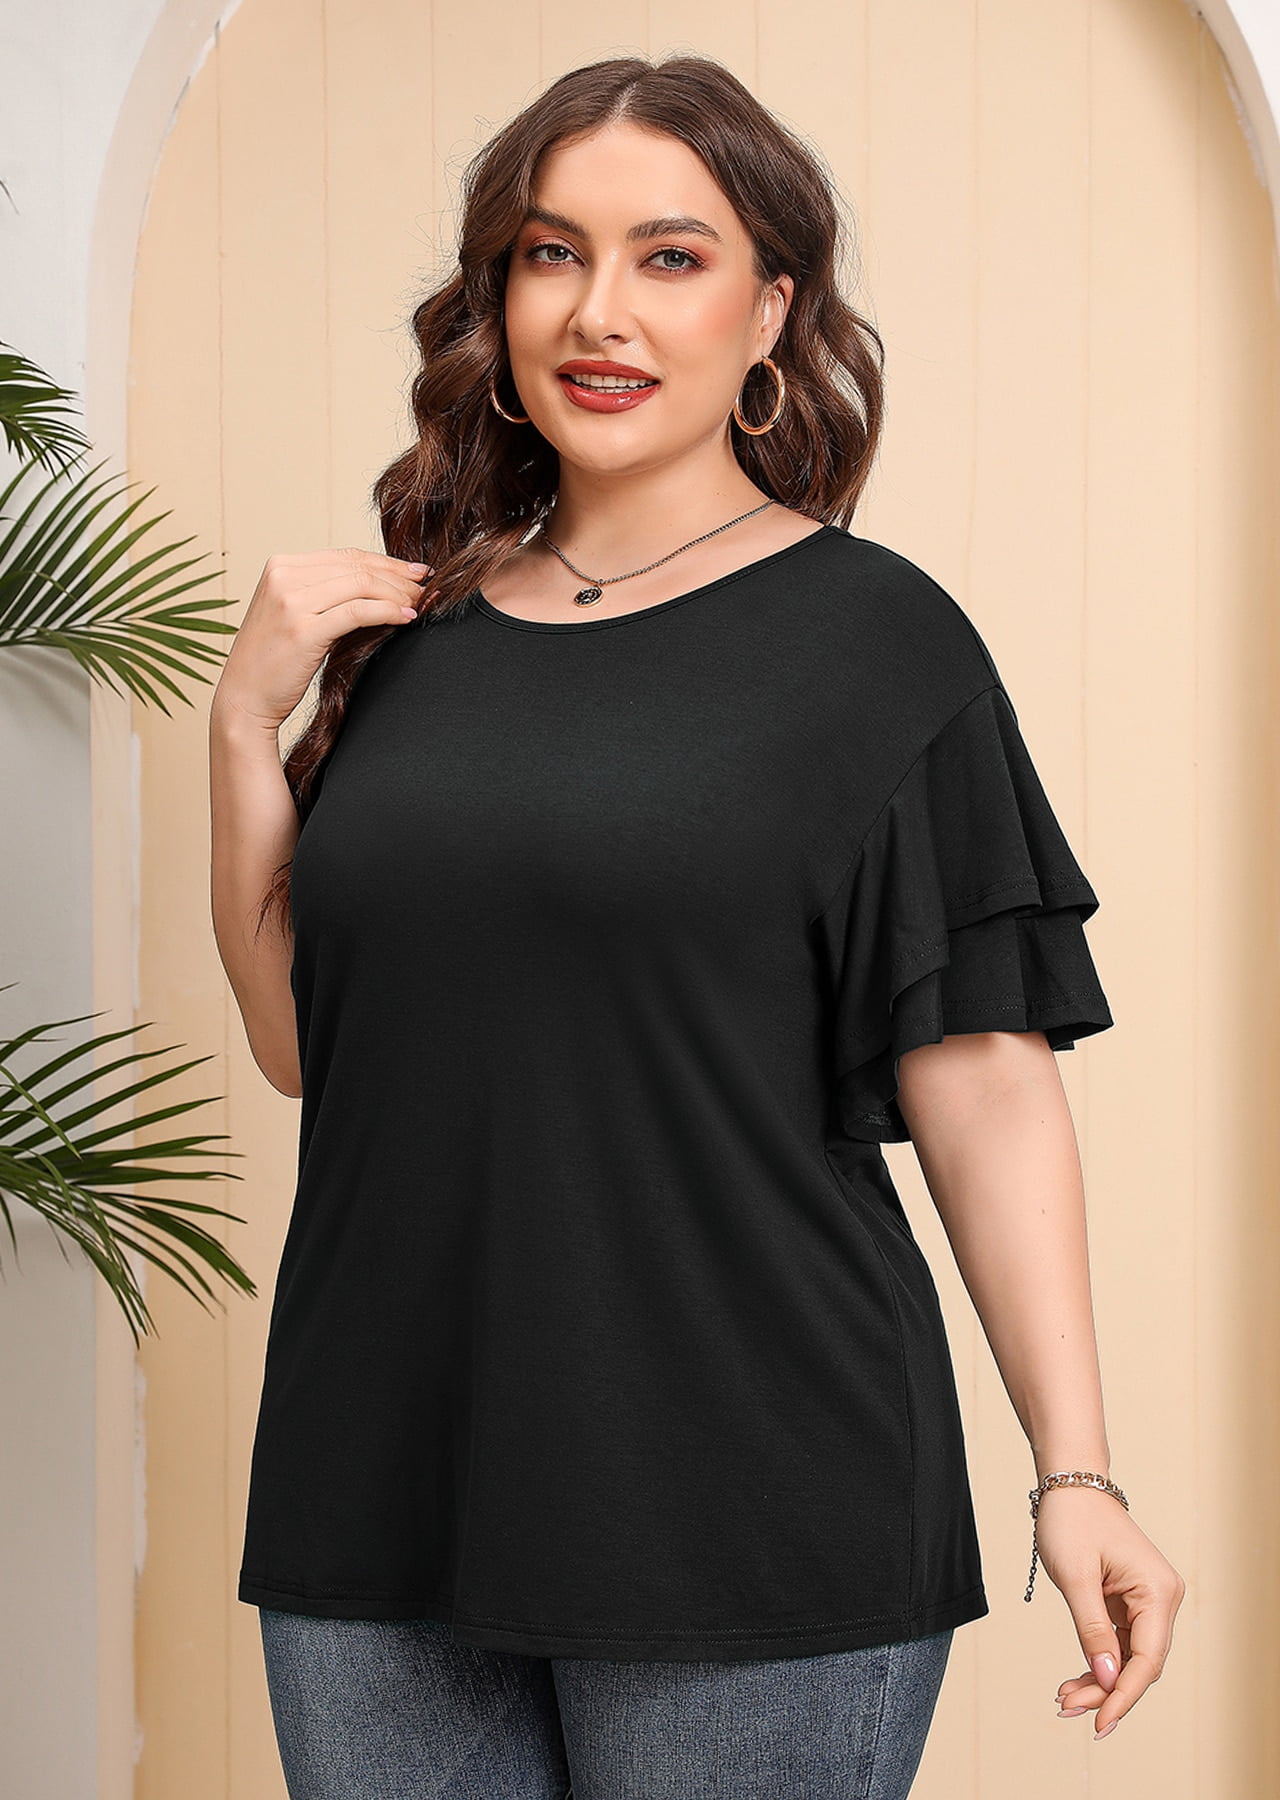 SHOWMALL Plus Size Clothes for Women Short Sleeve Blue 4X Tunic Shirt  Summer Tops Blouse Loose Fitting Clothing